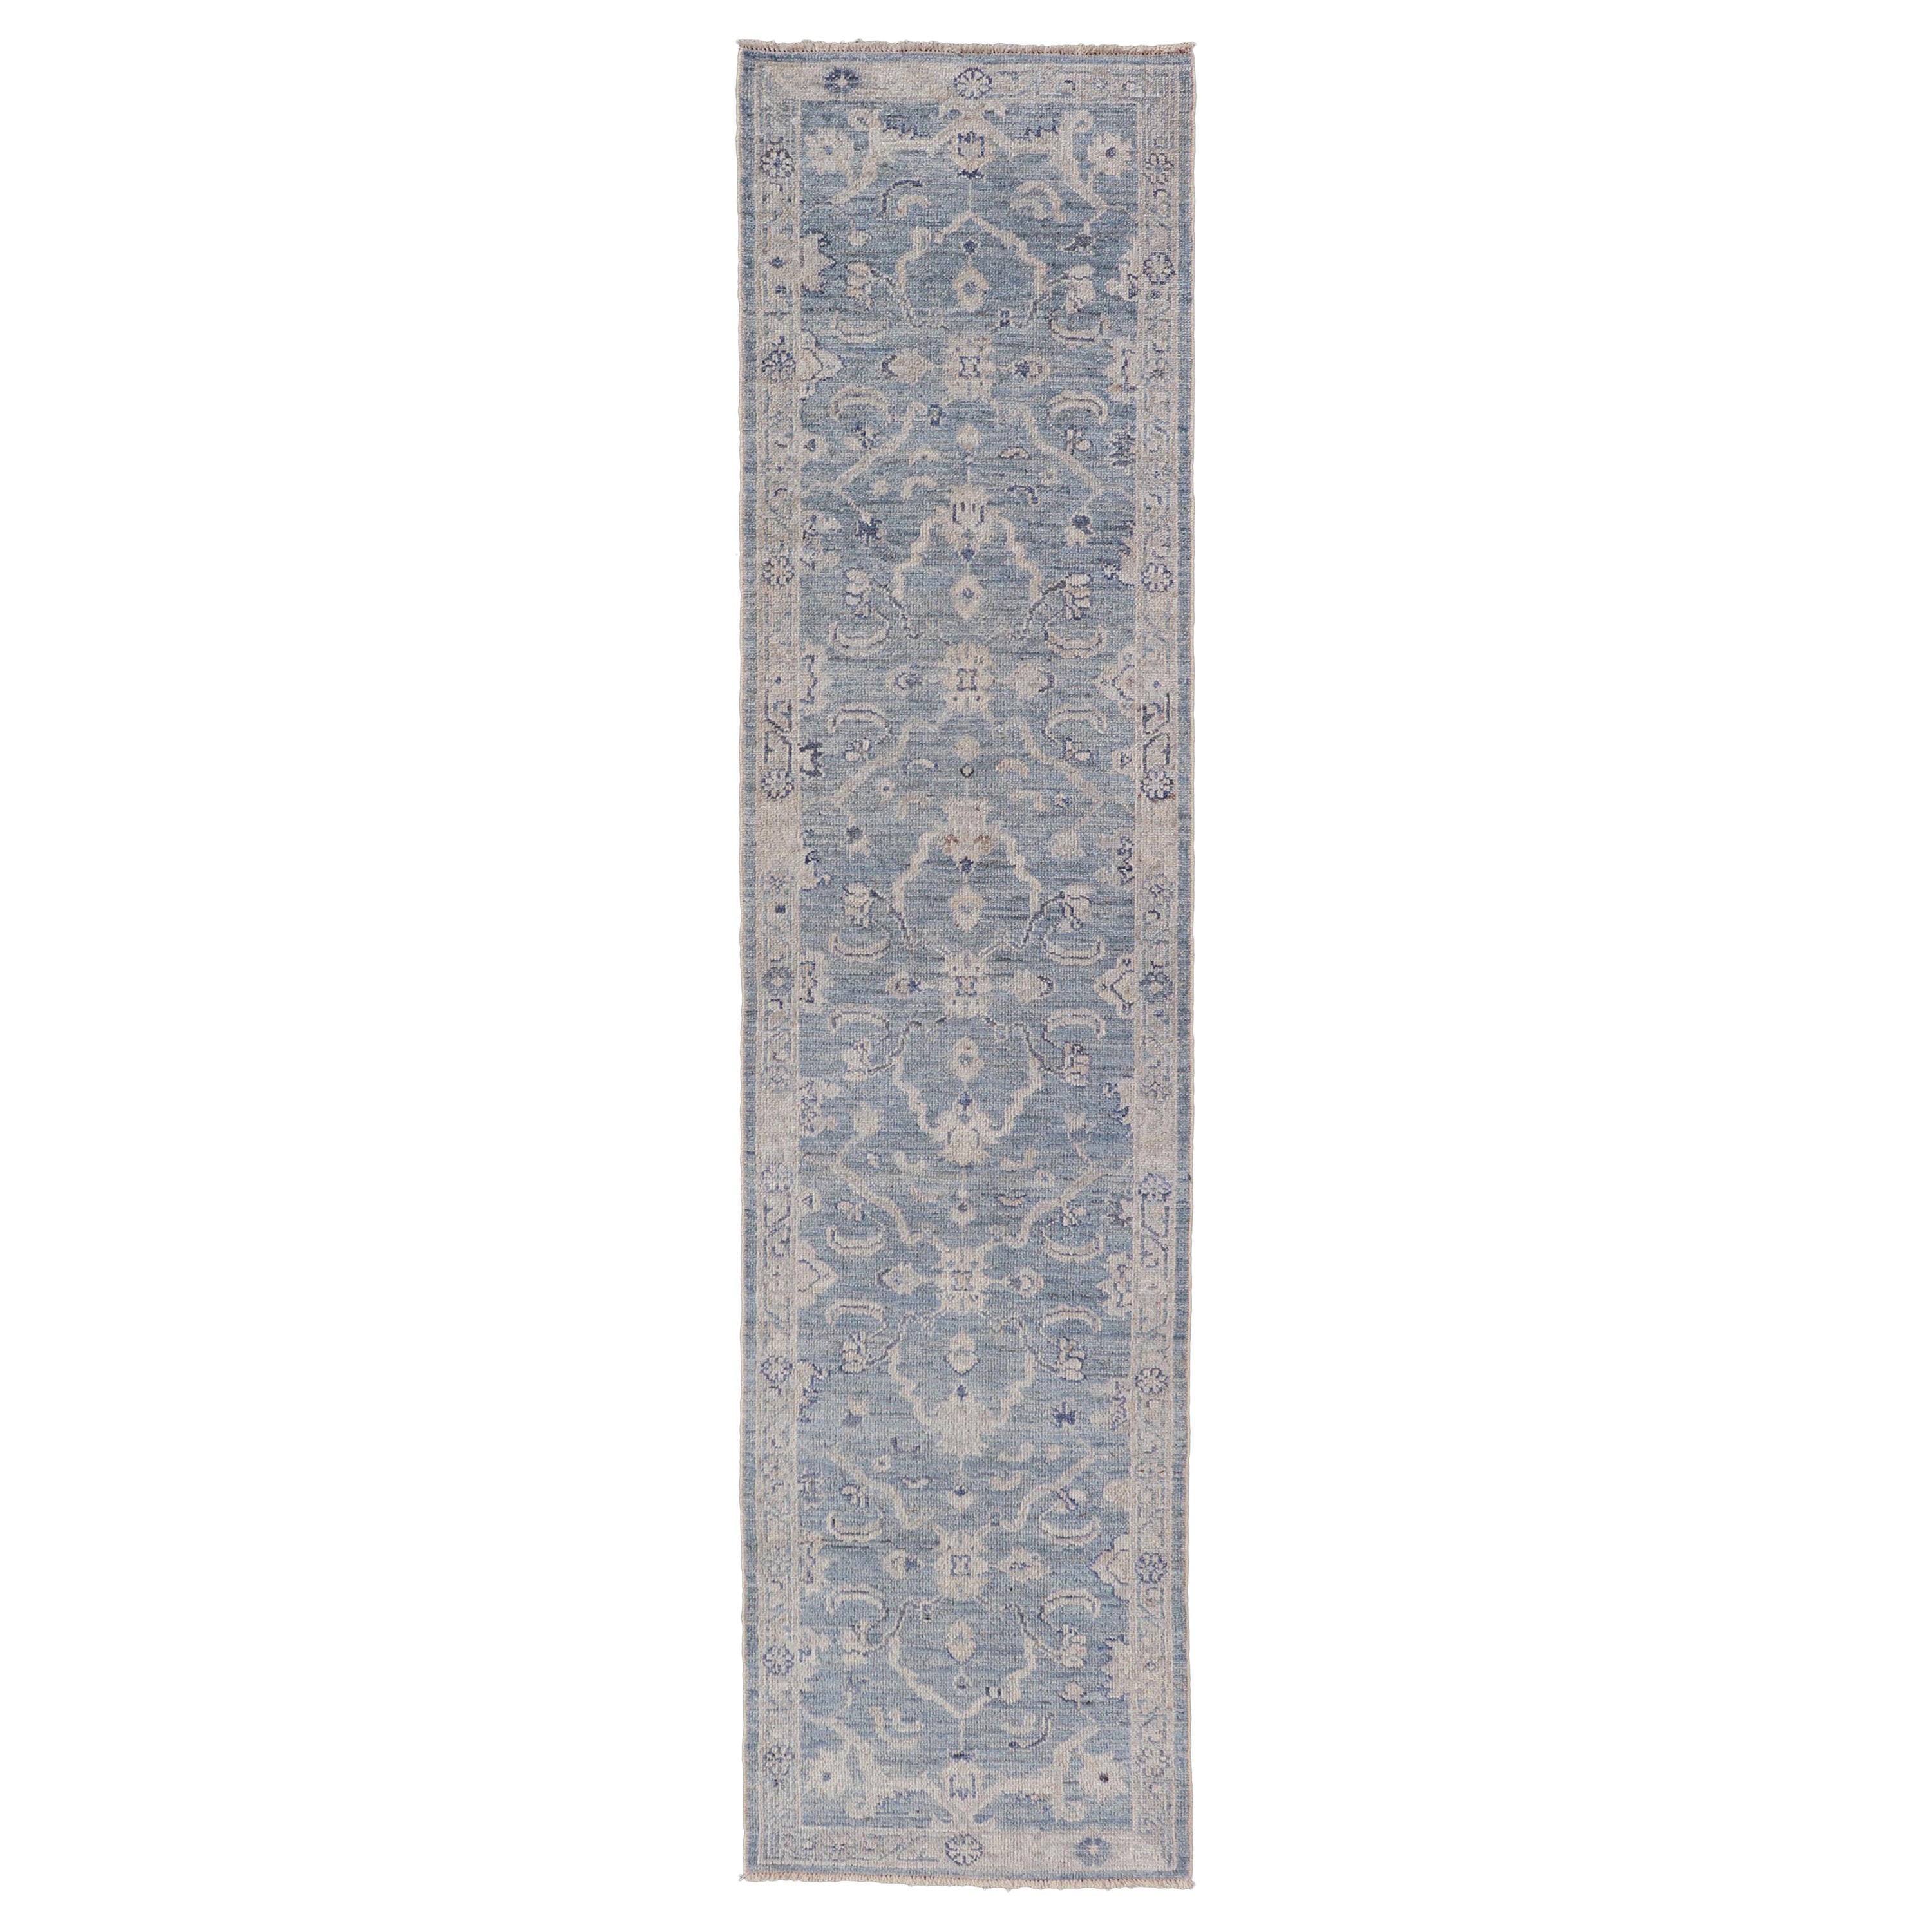 Angora Turkish Oushak Runner with Floral Design and Medium Blue and Grey Border For Sale